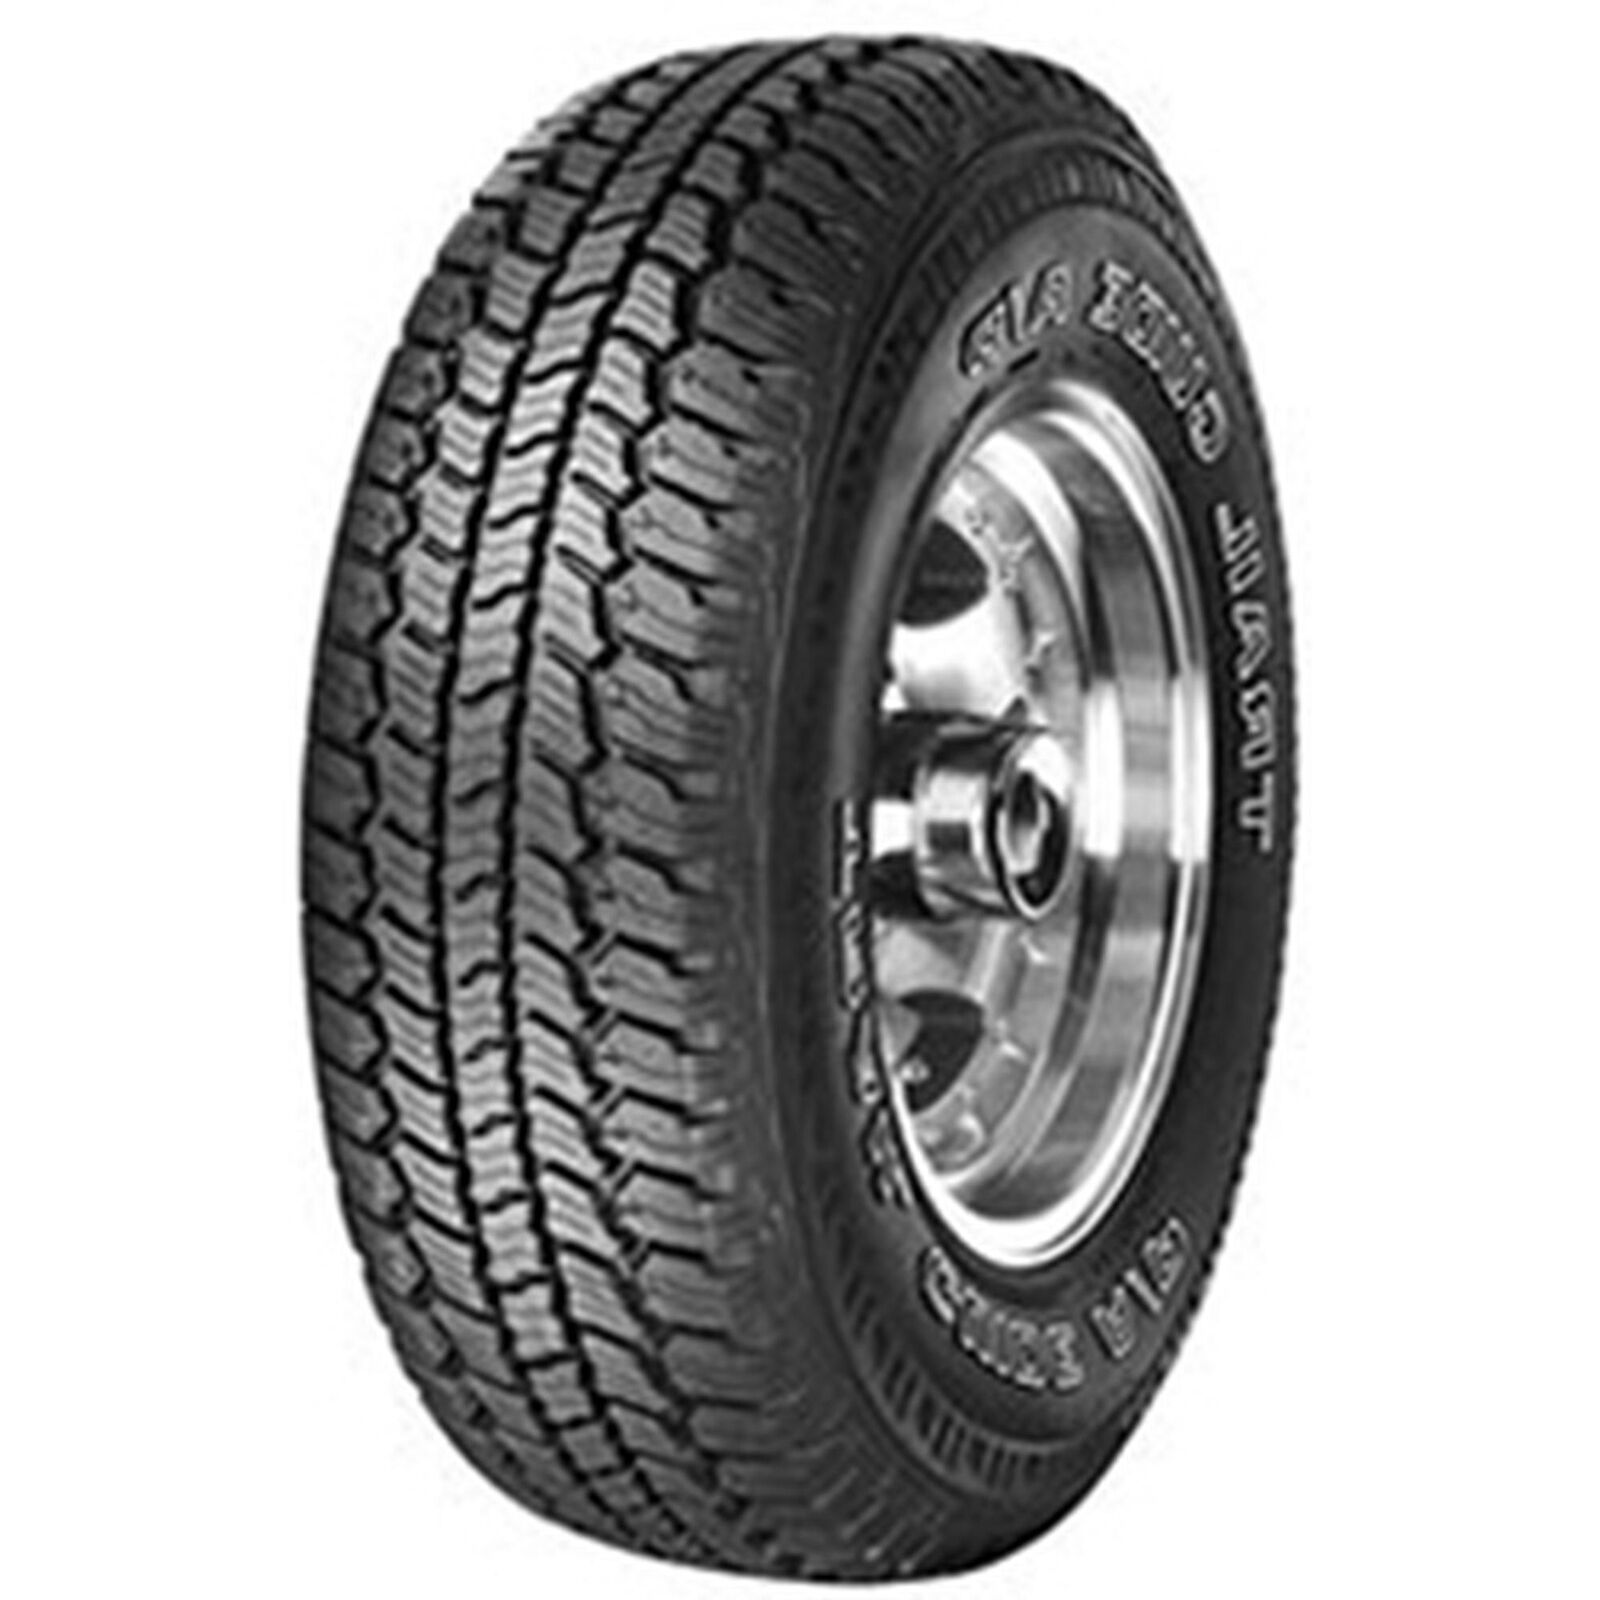 4 New Sigma Trail Guide A/t  - Lt265x70r18 Tires 2657018 265 70 18